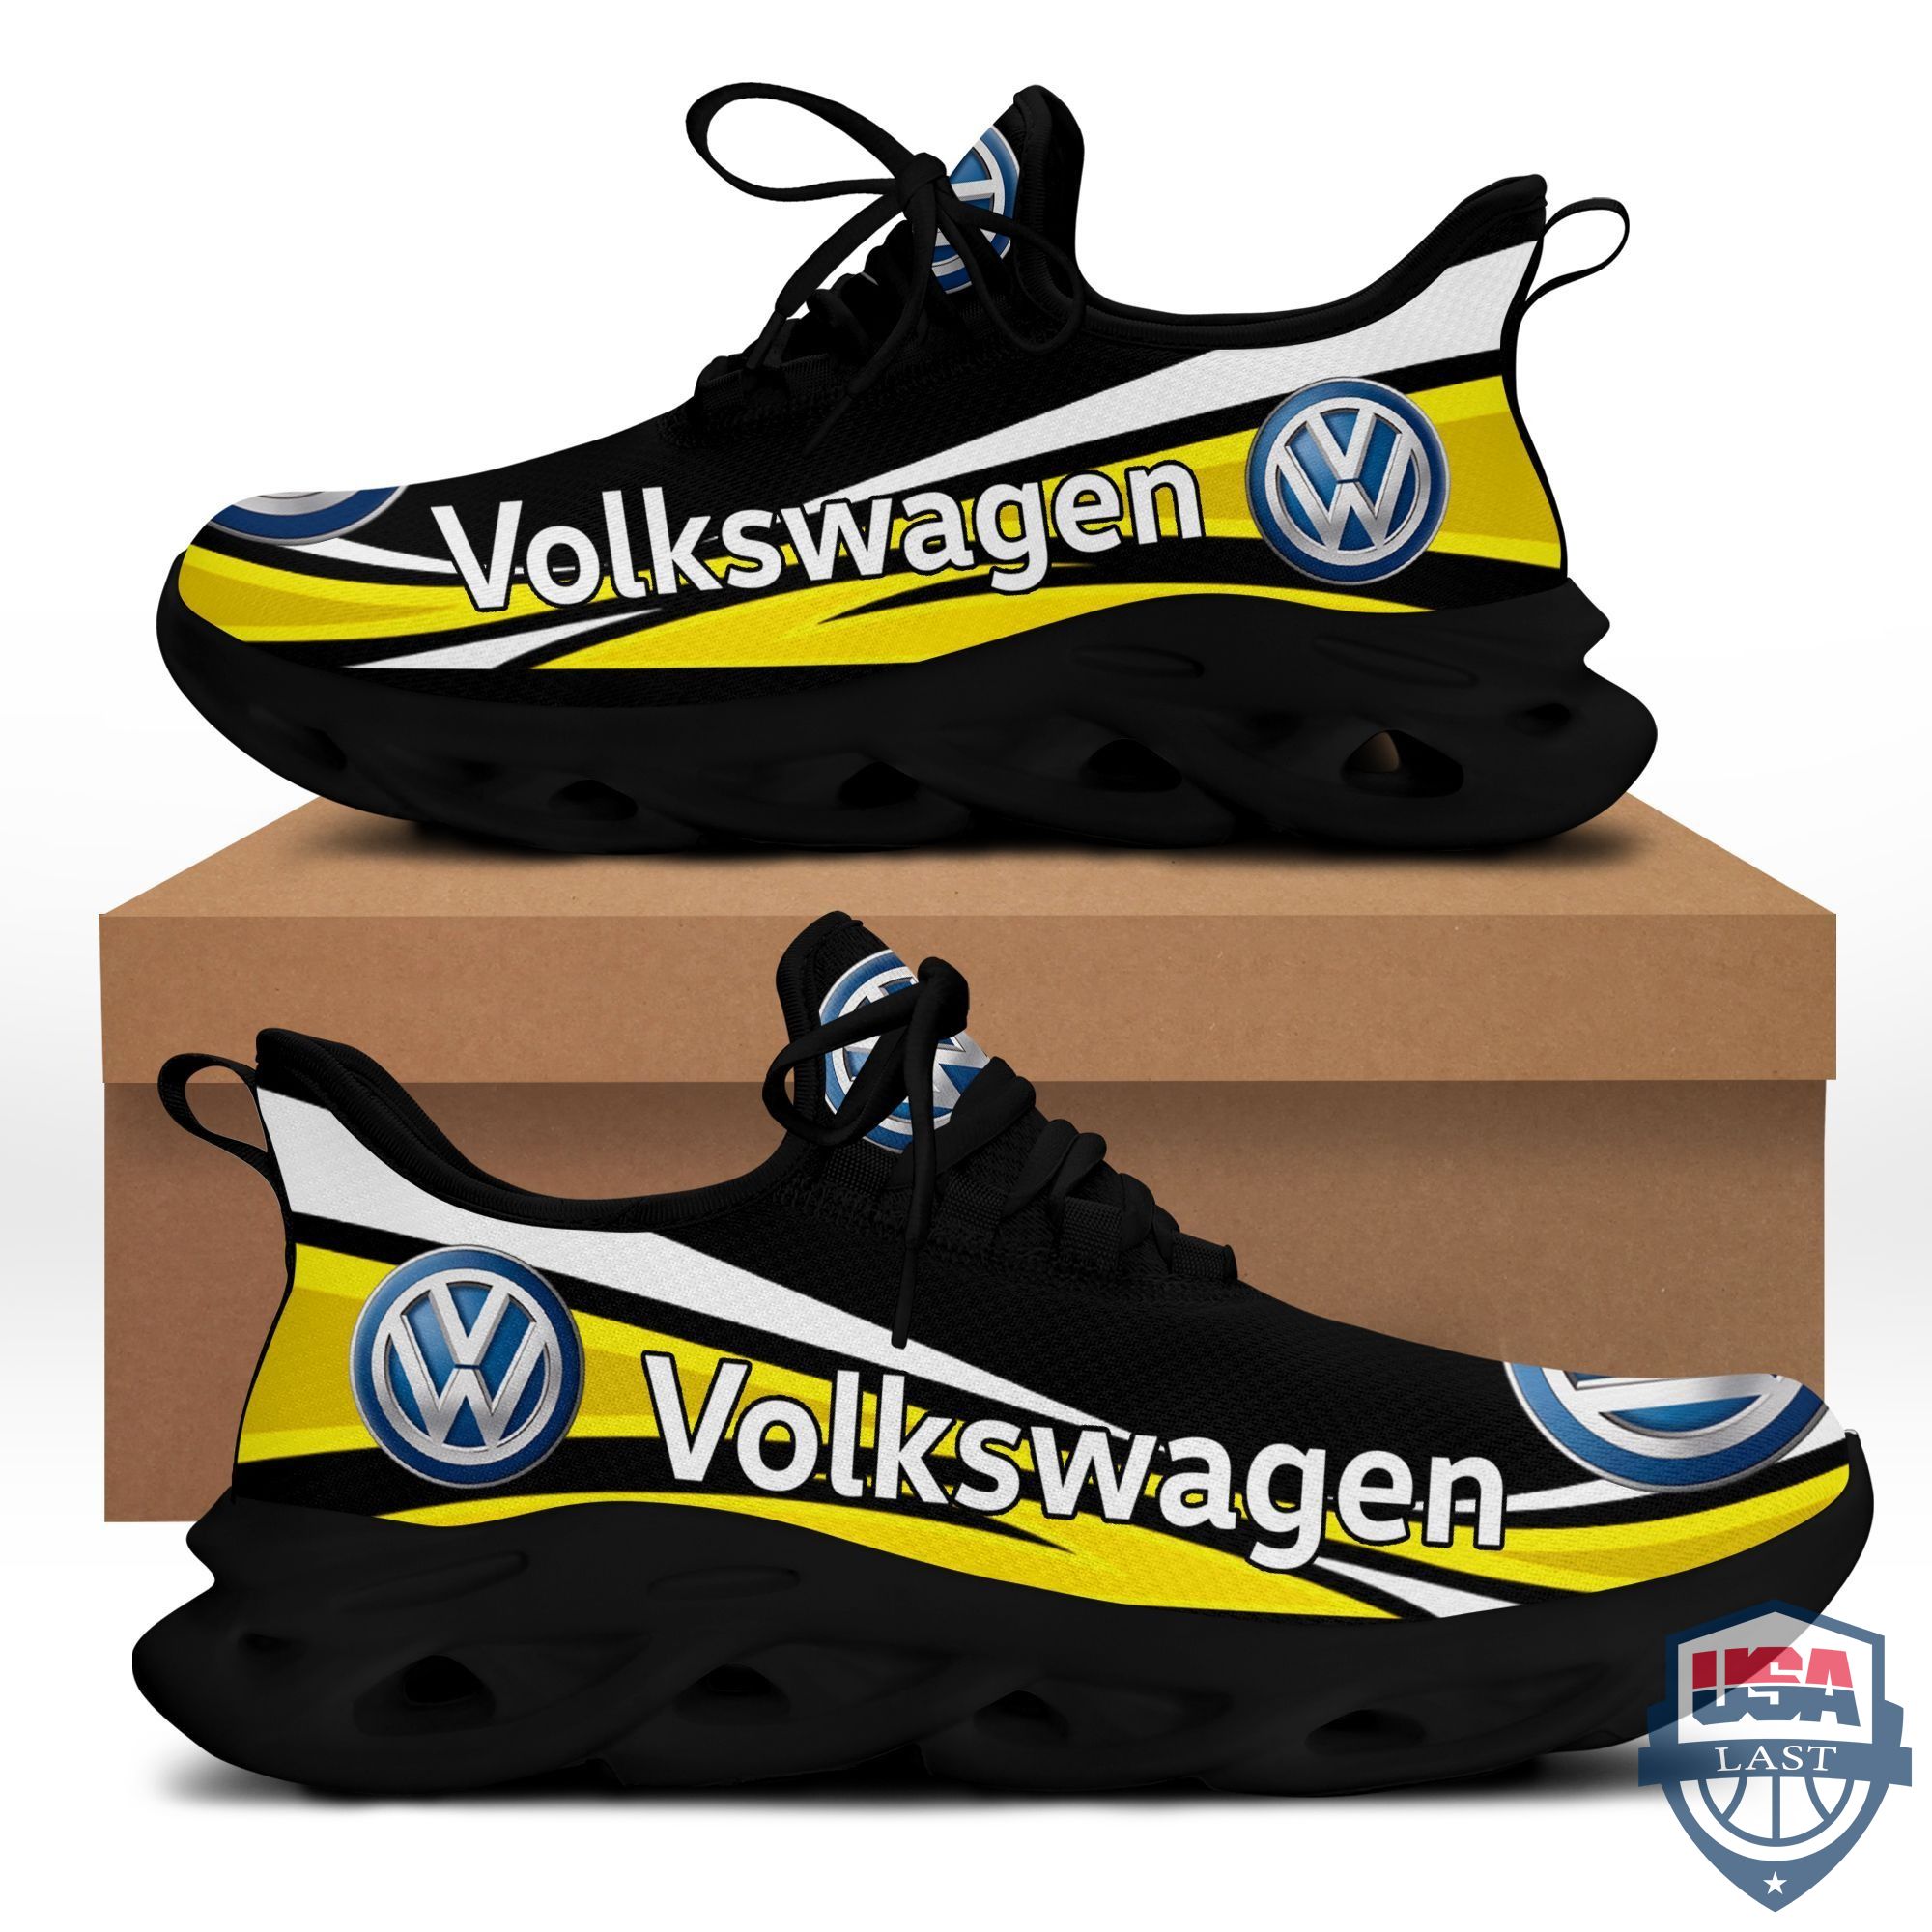 Volkswagen Max Soul Chunky Shoes Blue Version